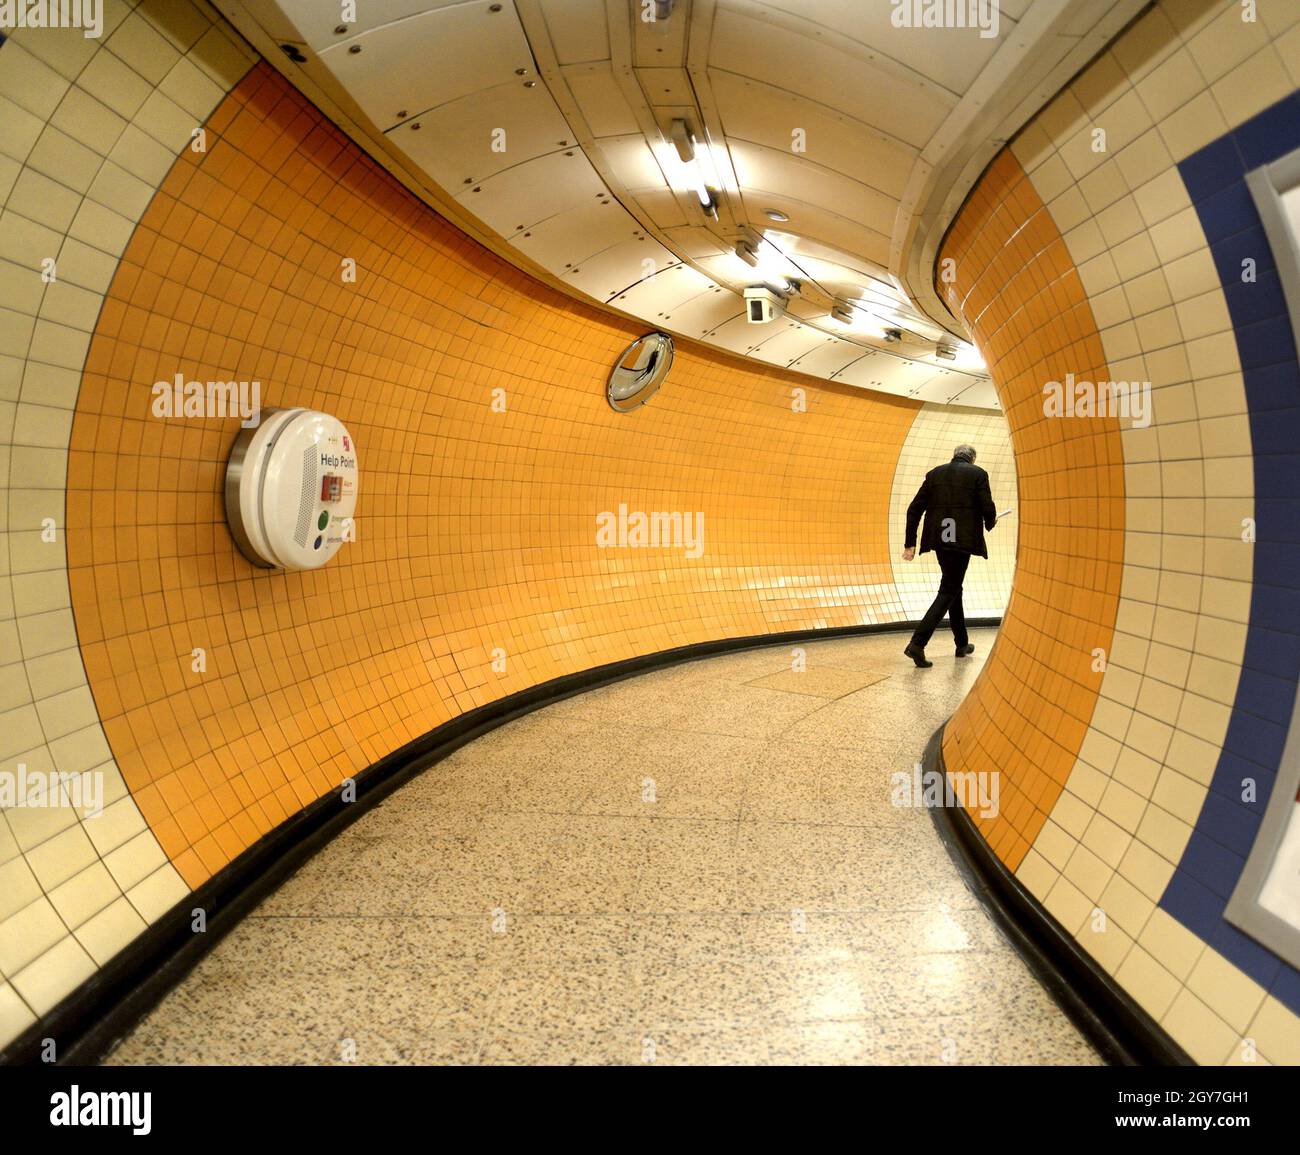 London, England, UK. Man walking through a tunnel in a tube station Stock Photo